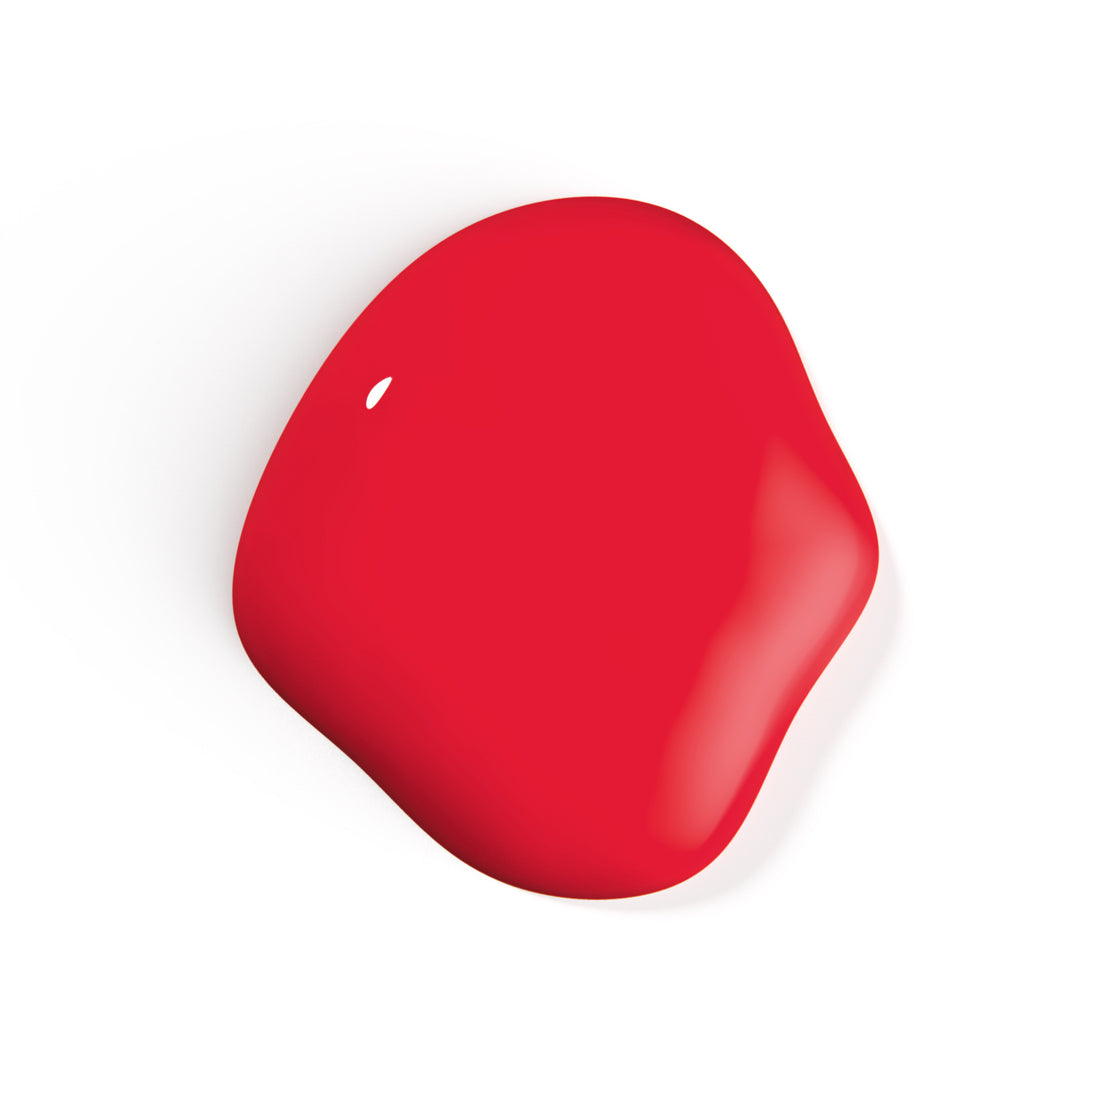 A droplet of Liberation Nails 21-free nail polish in a bold punchy red with a hint of orange color, Arrival